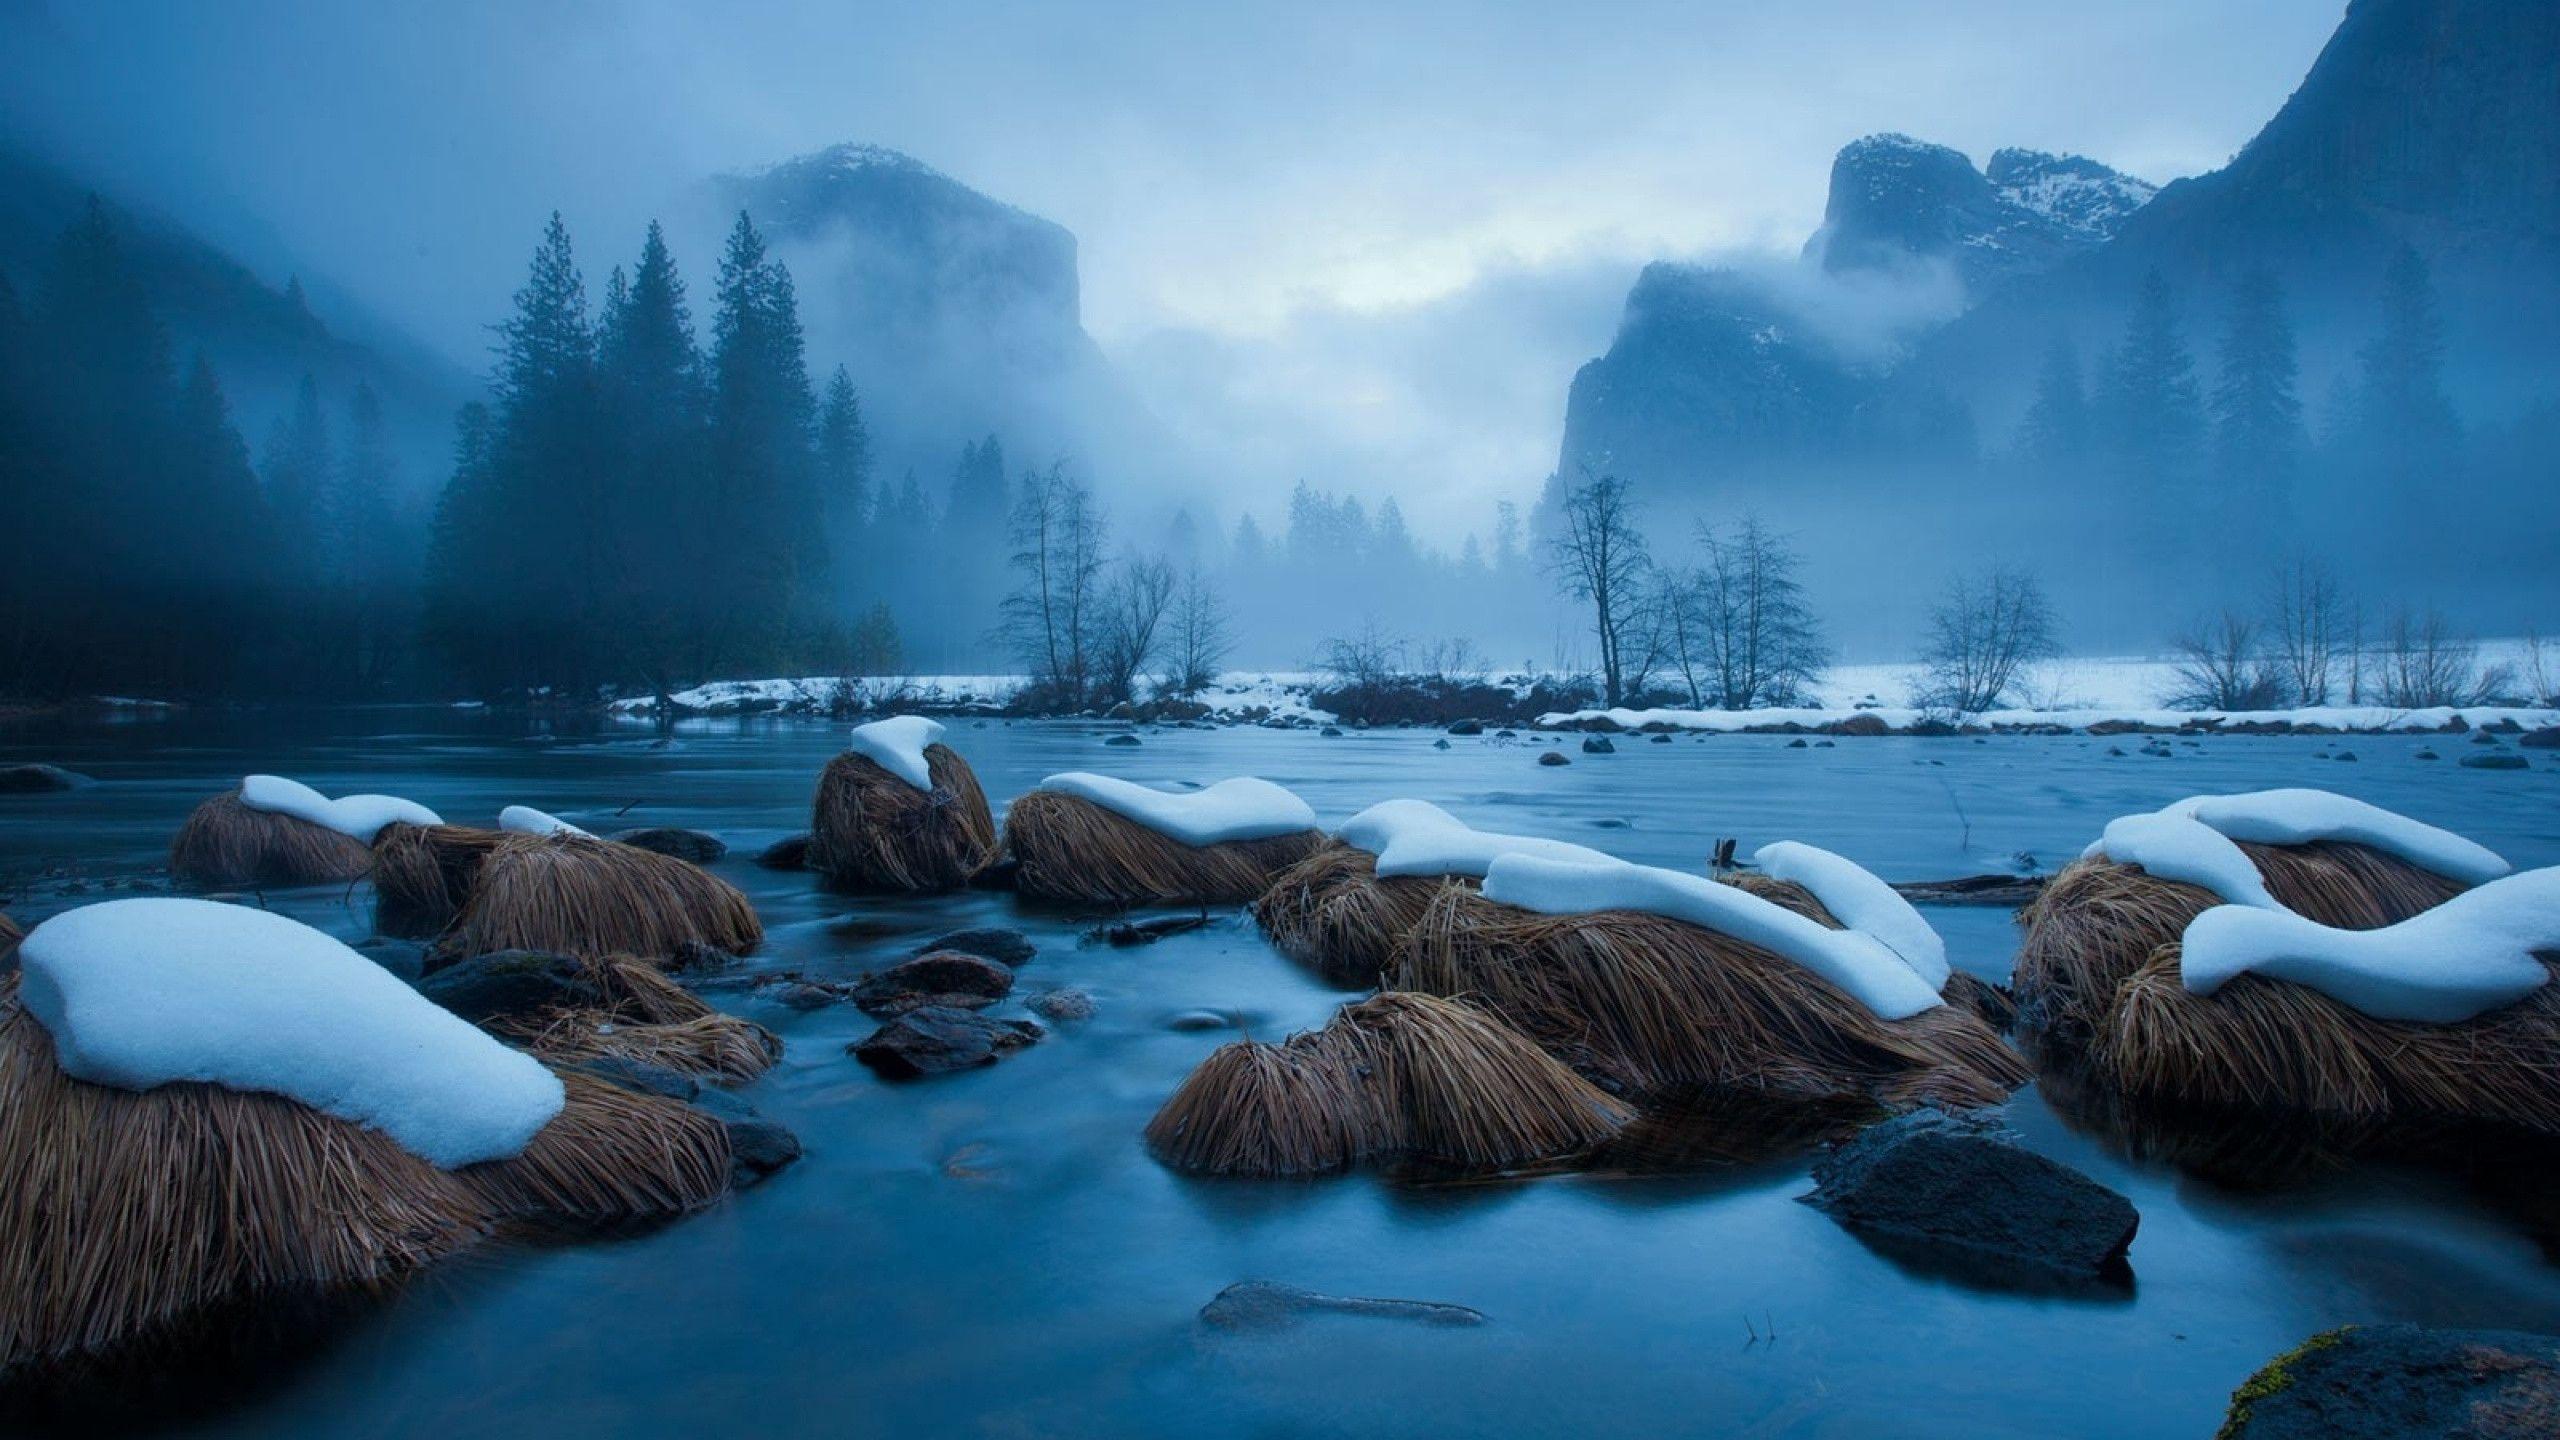 Download Yosemite Picture 17000 2560x1440 px High Resolution